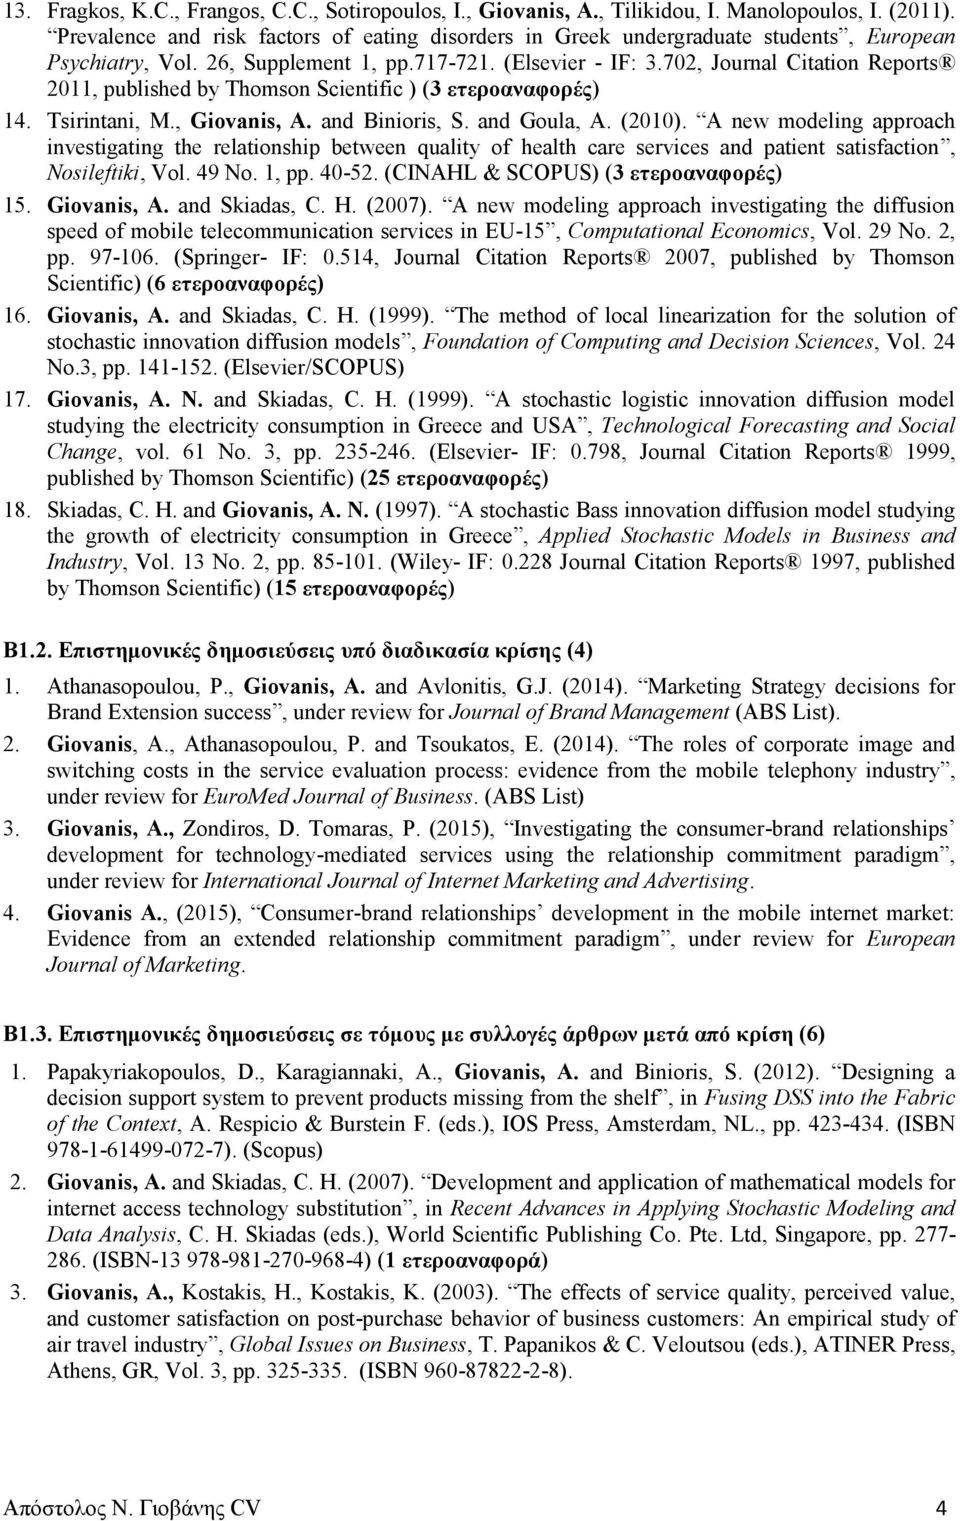 702, Journal Citation Reports 2011, published by Thomson Scientific ) (3 ετεροαναφορές) 14. Tsirintani, M., Giovanis, A. and Binioris, S. and Goula, A. (2010).